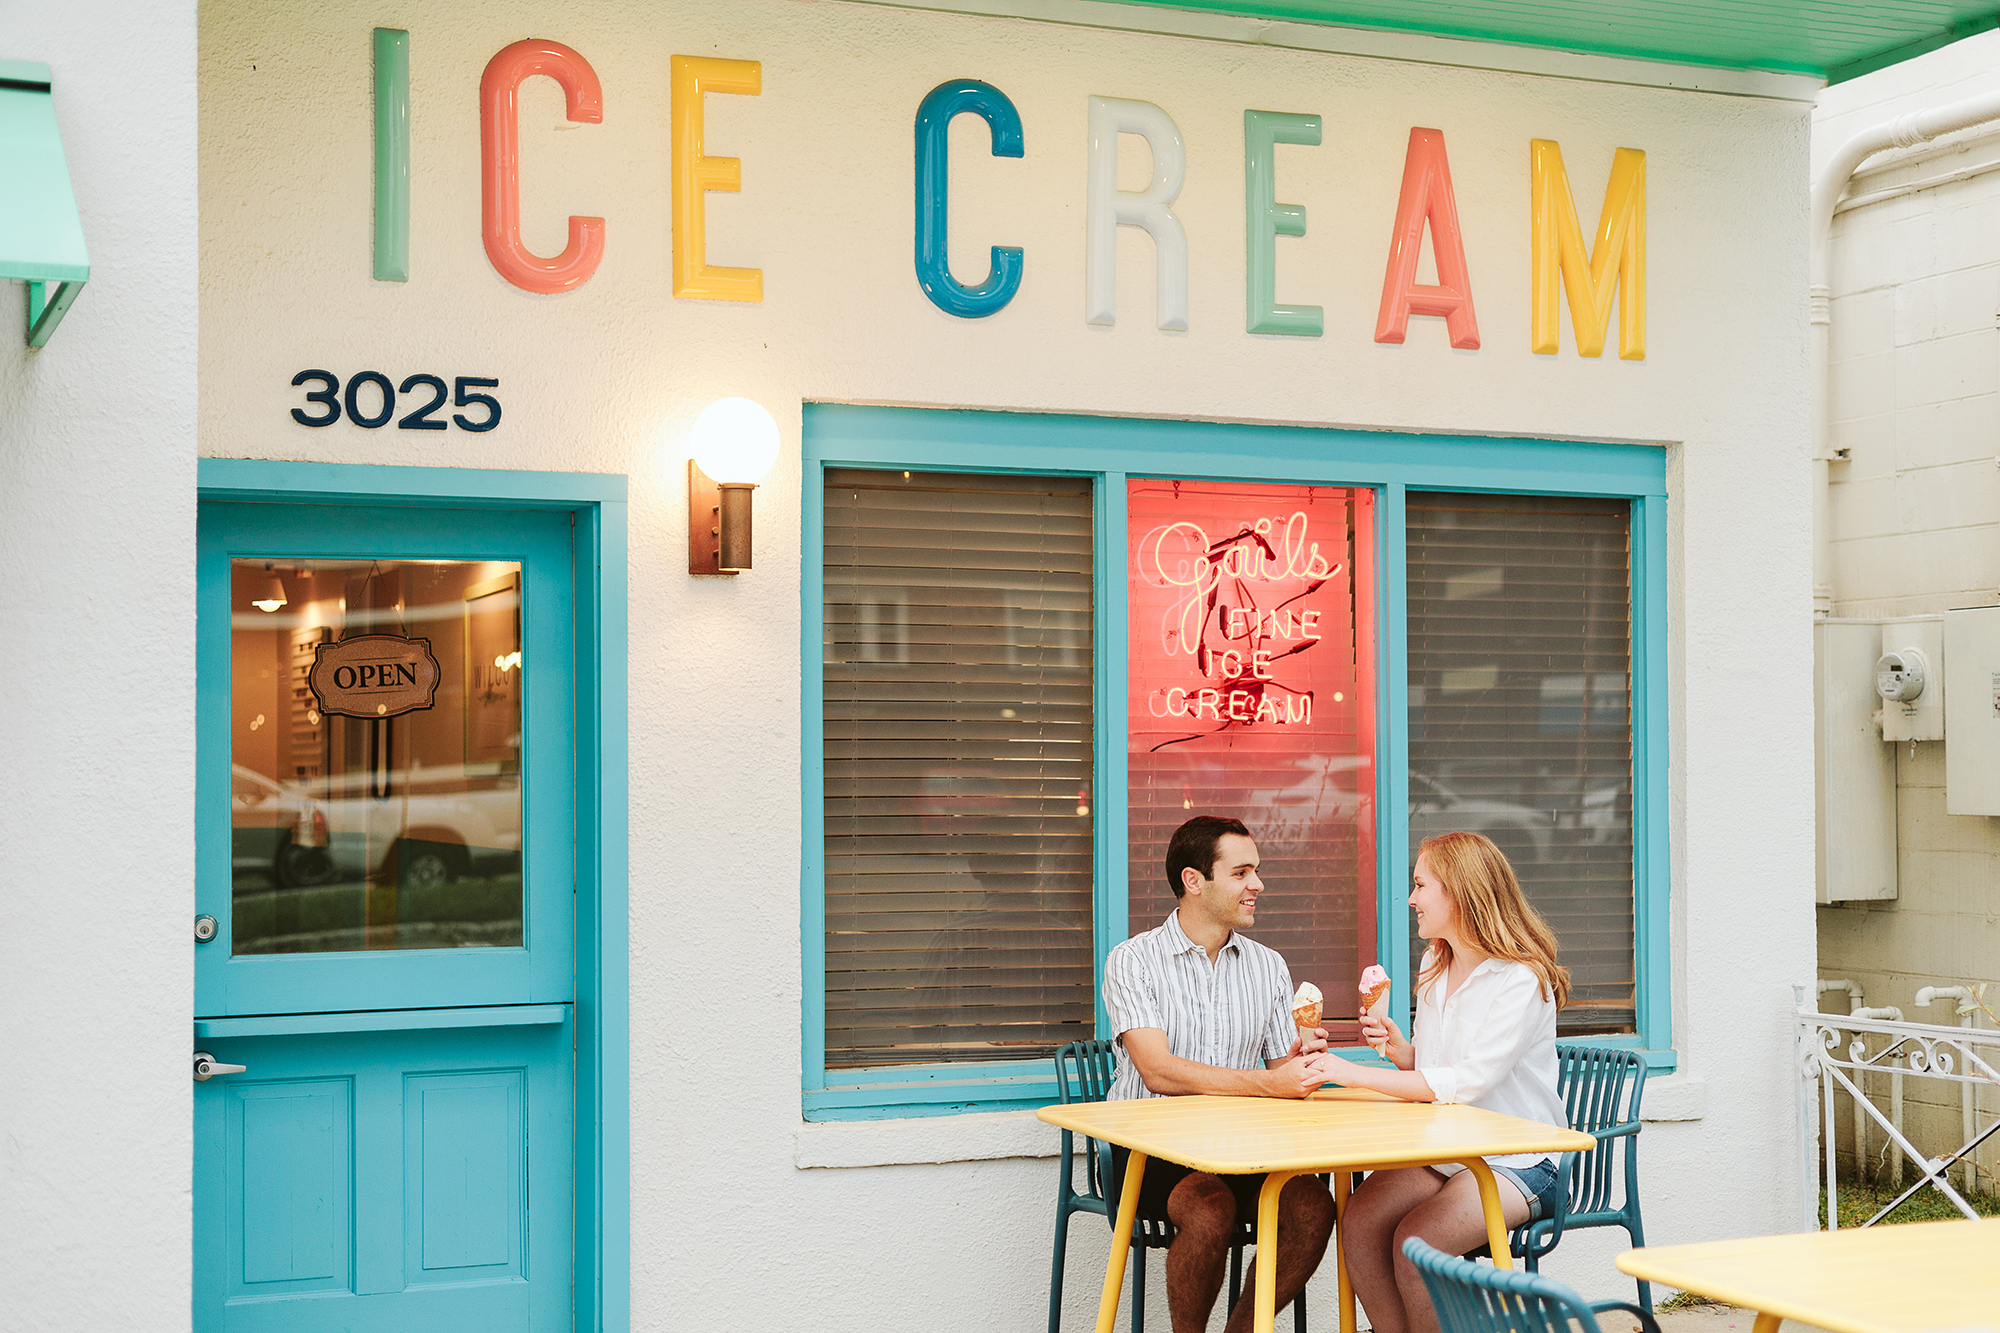 couple at an ice cream shop for a date